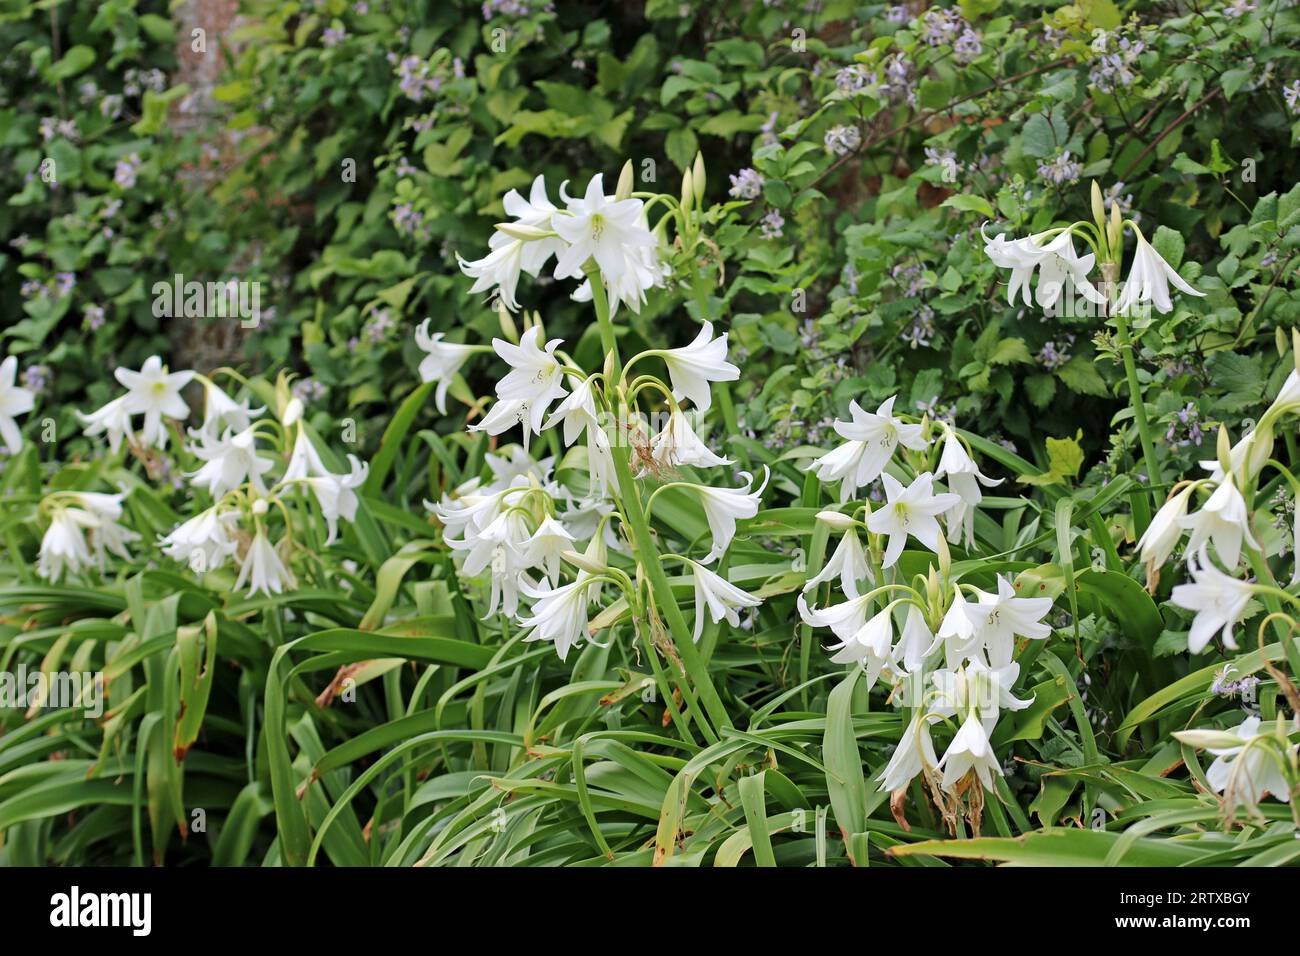 White powell hybrid swamp lily, Crinum powellii x album, flowers with a blurred background of shrubs. Stock Photo